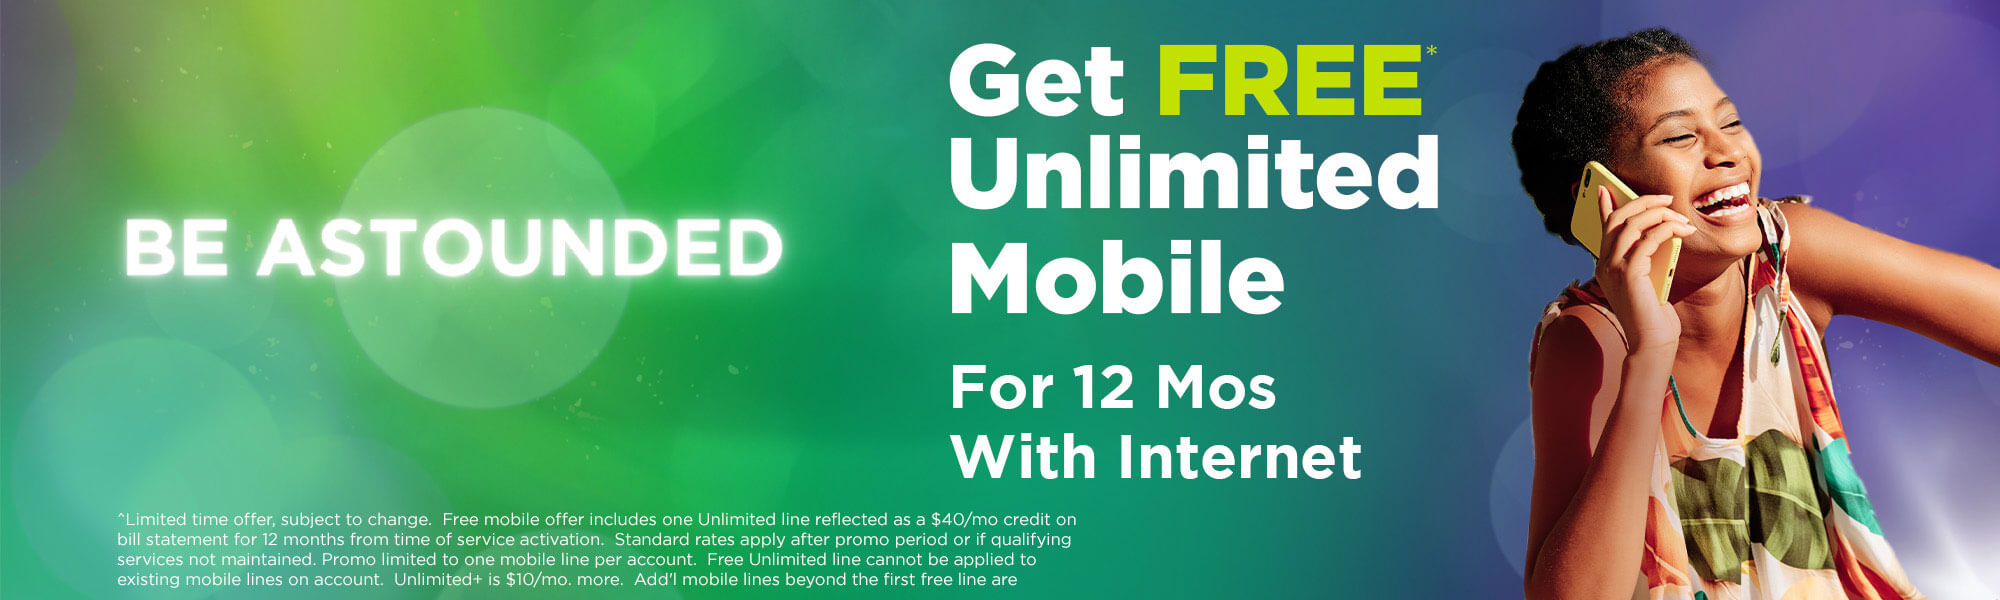 Get free unlimited mobile for 12 months with internet